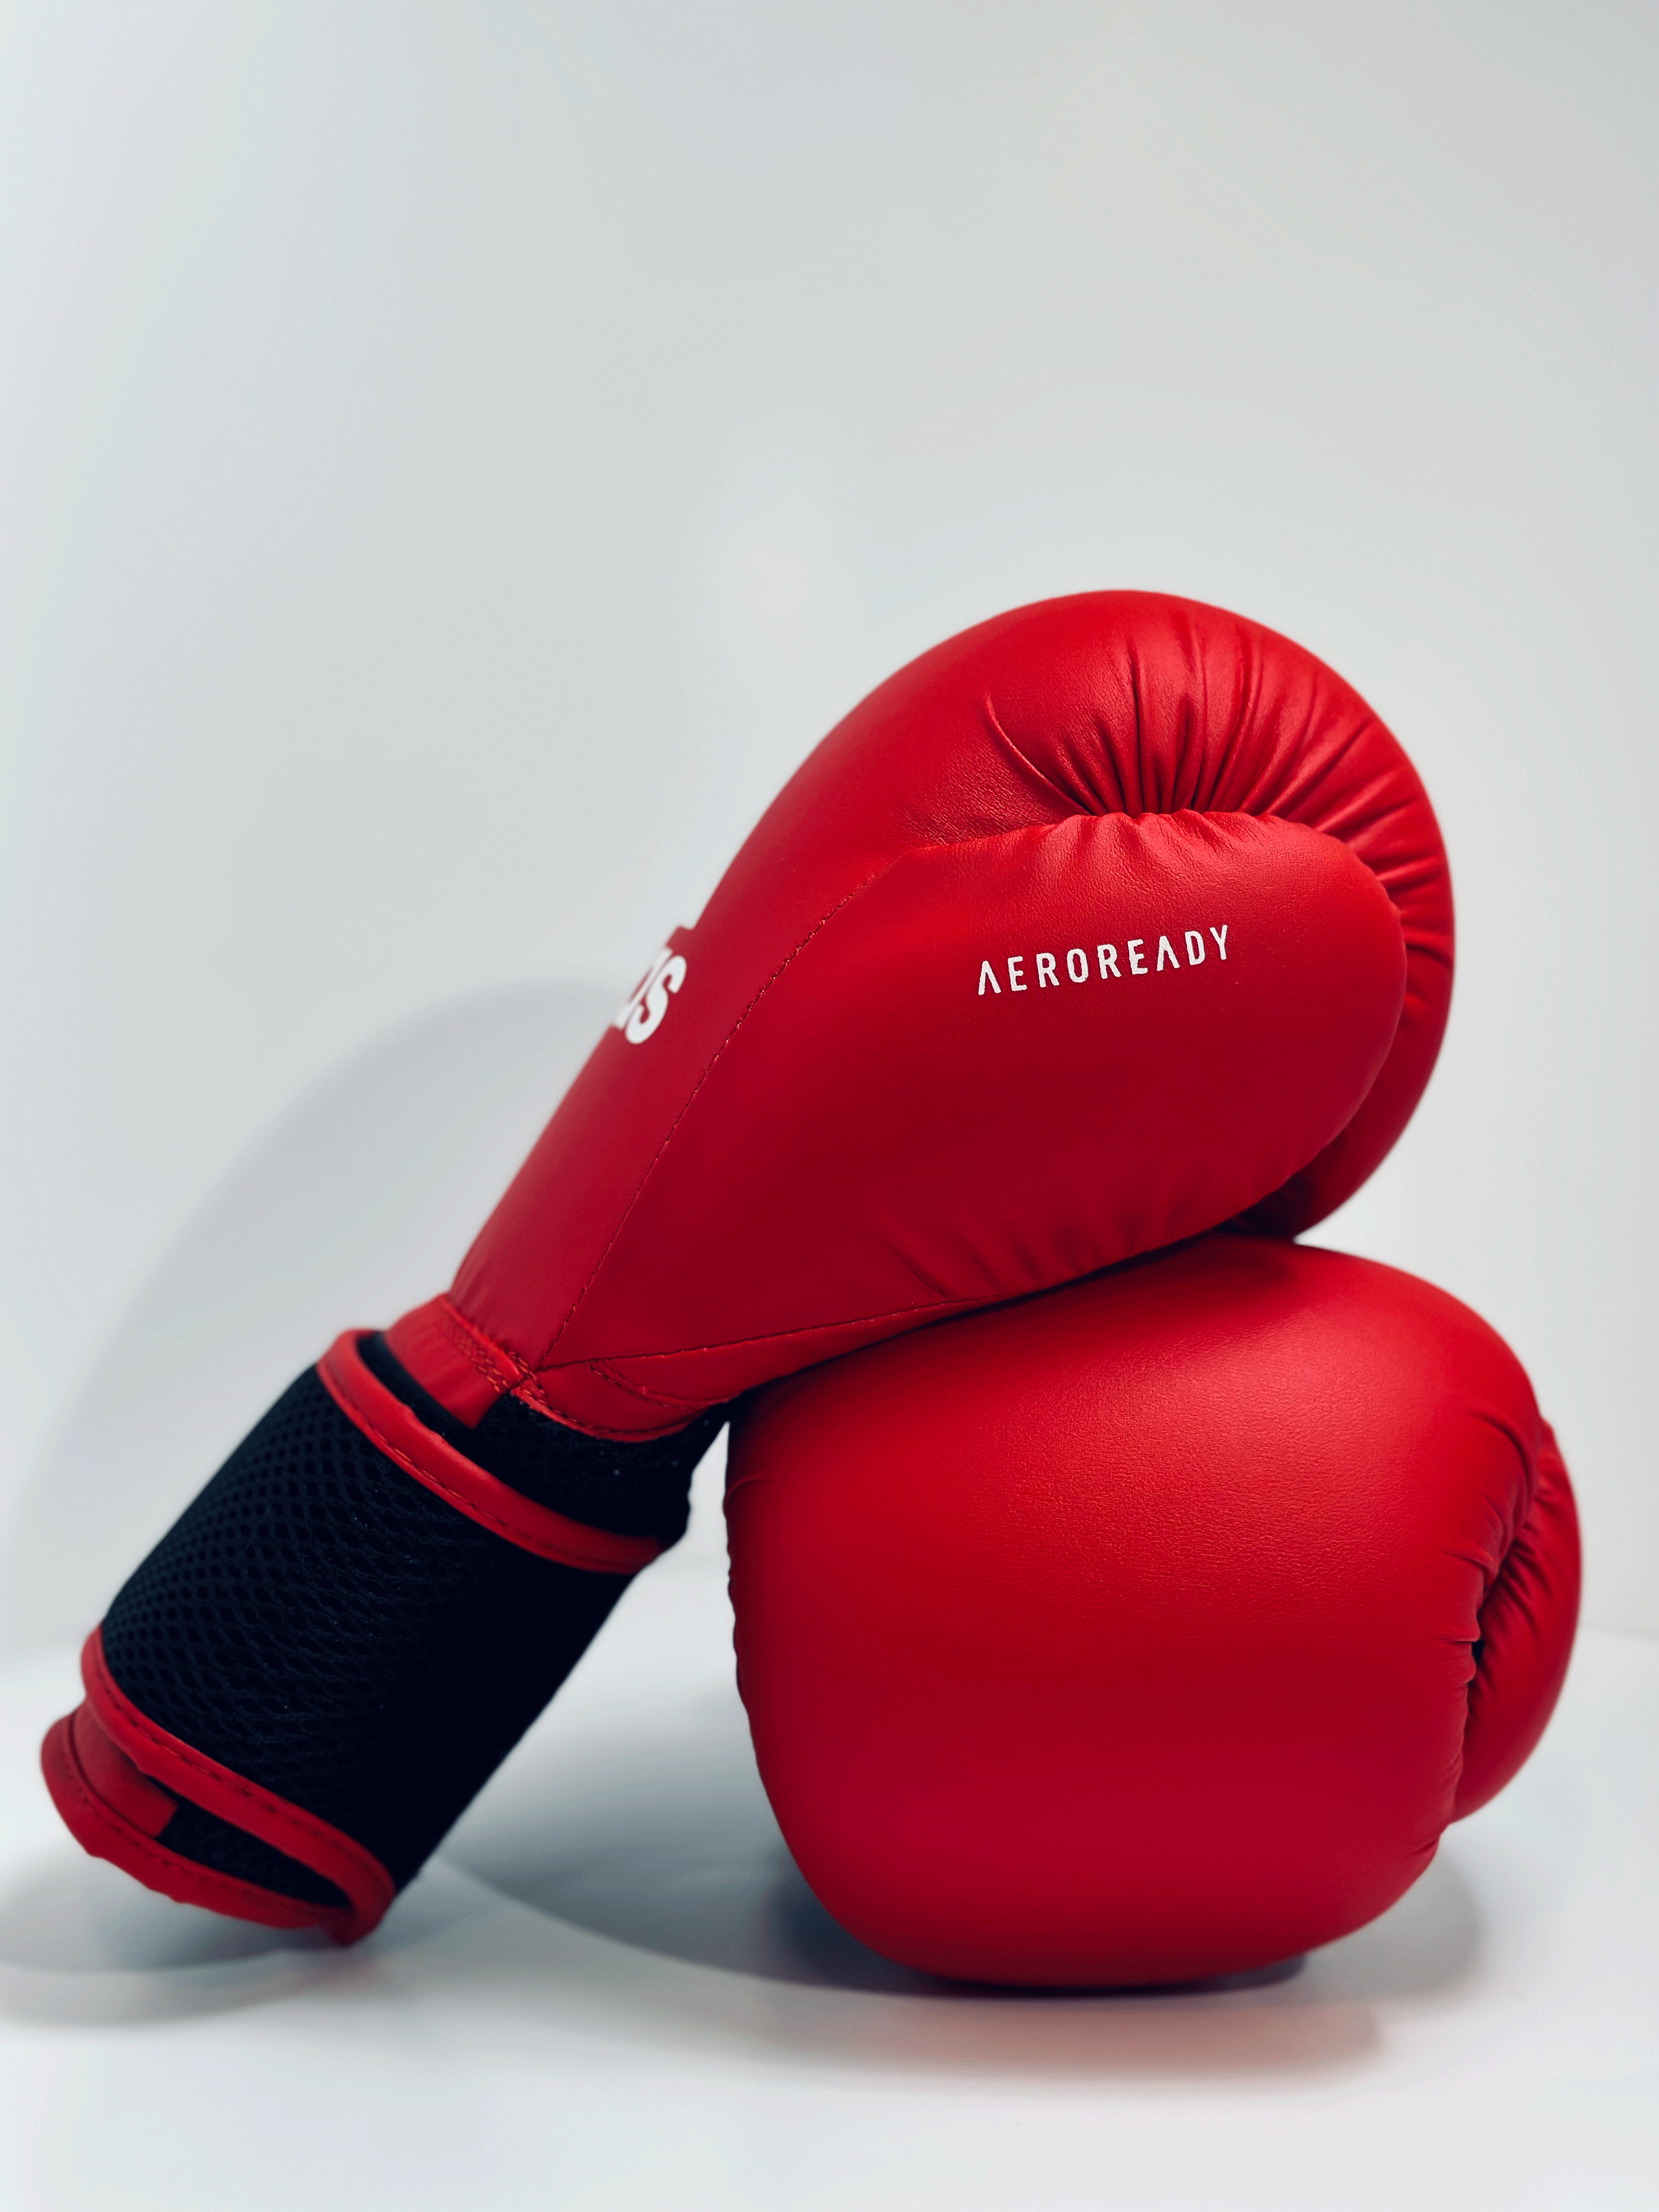 Adidas Hybrid25 AEROREADY Boxing Gloves | Durable Synthetic Leather, Moisture Wicking Technology | Ideal for Beginners | Available in Black, Red, Blue